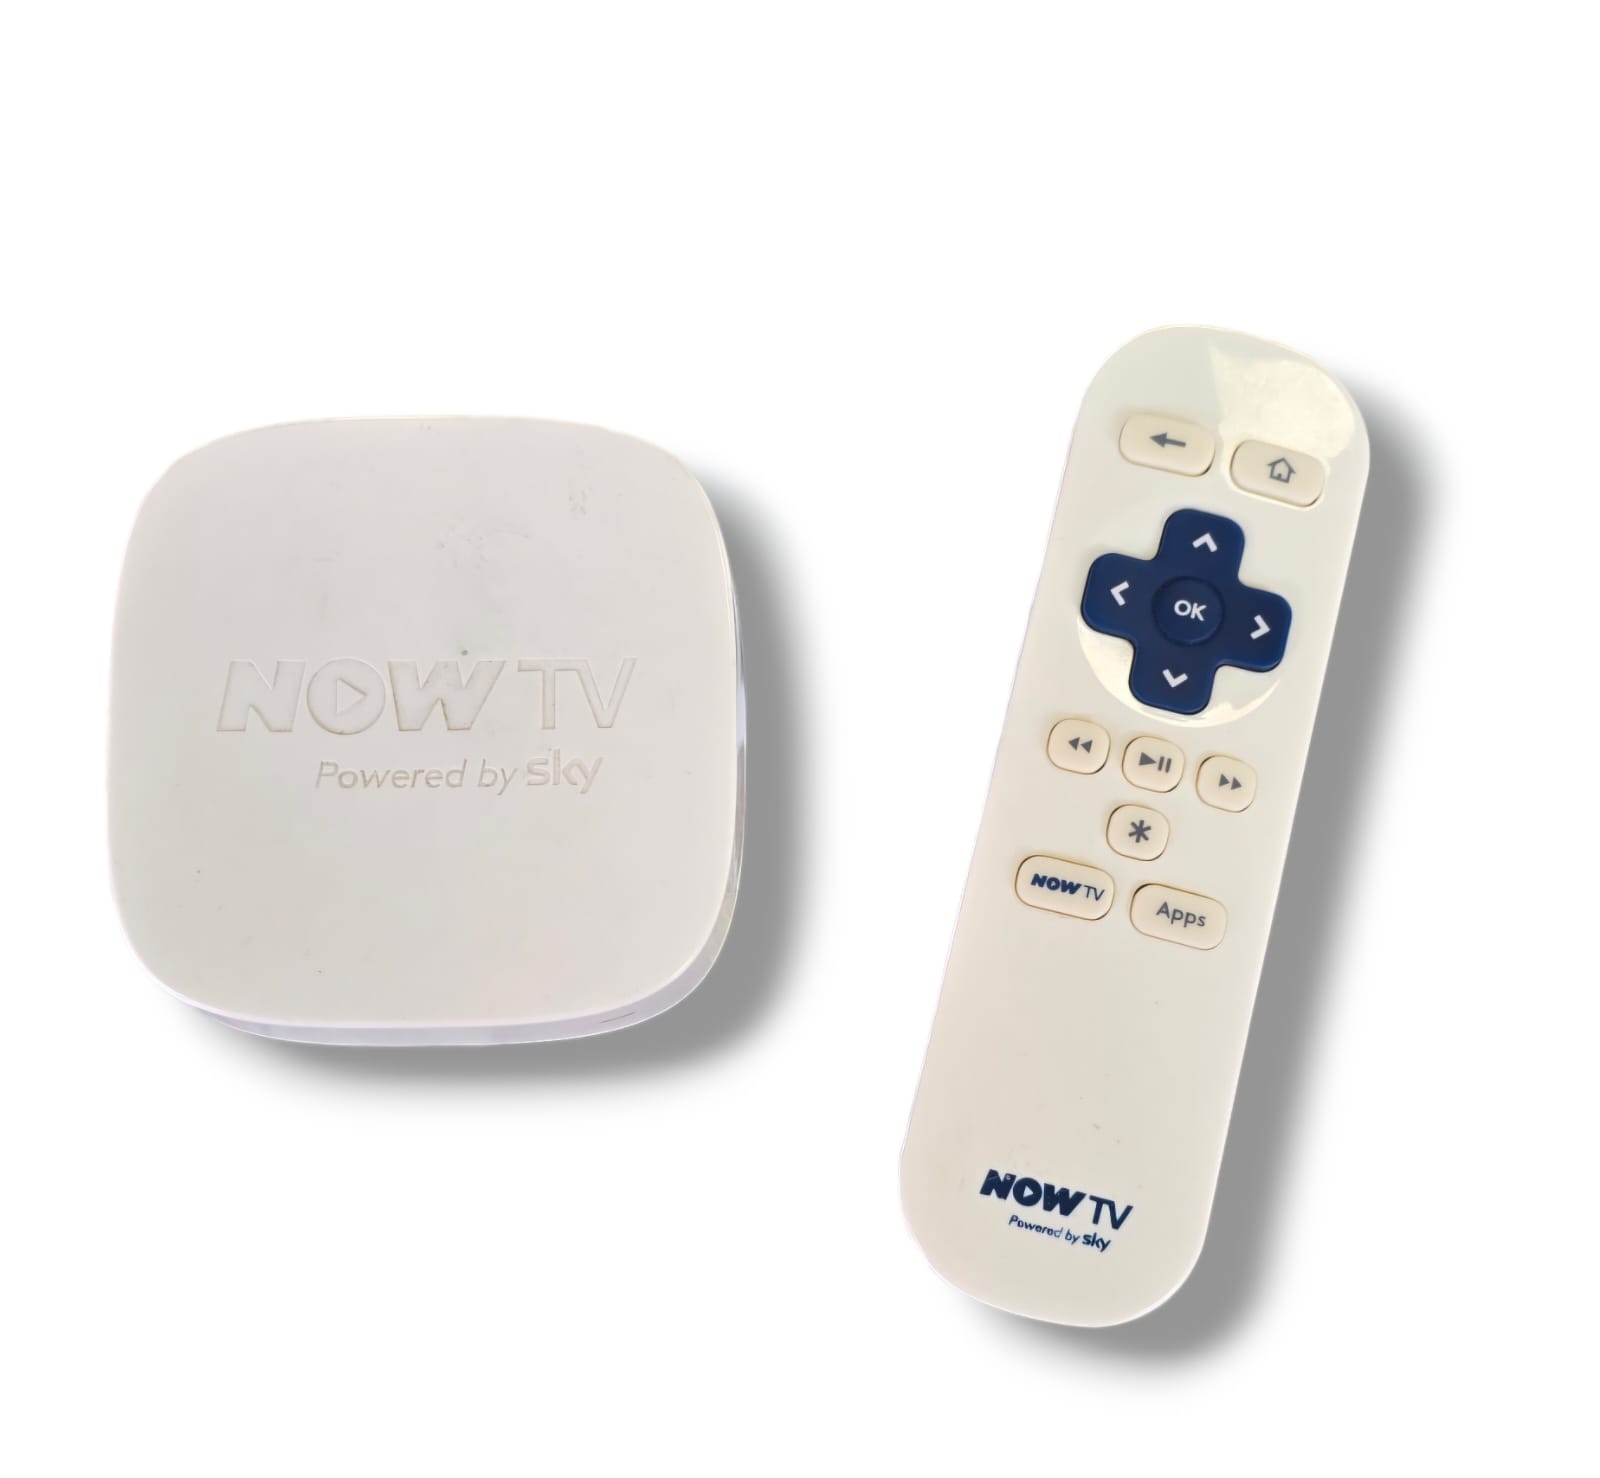 Now Tv Box with remote